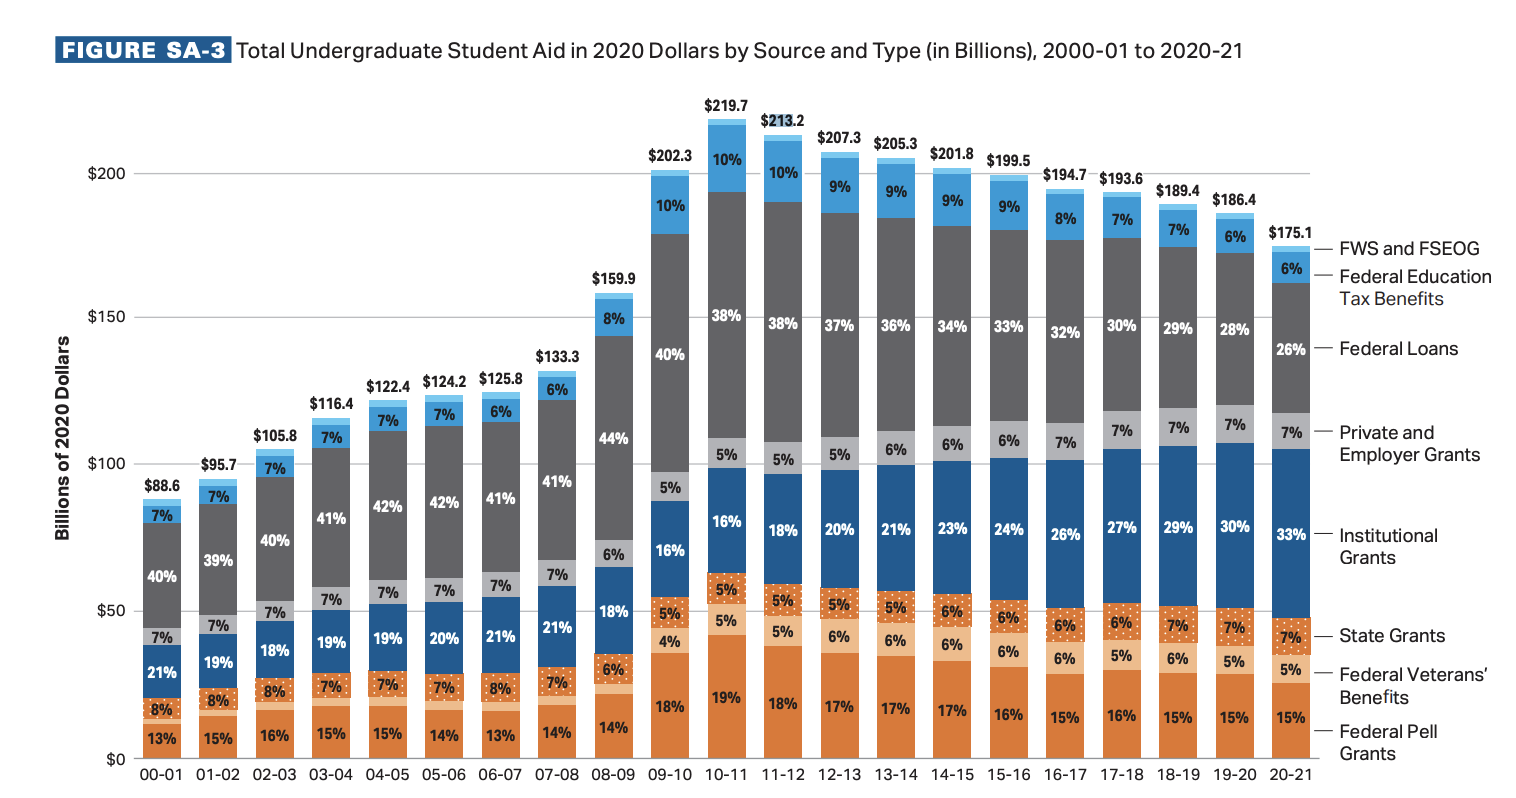 Source: Trends in College Pricing and Student Aid 2021, College Board, 2021